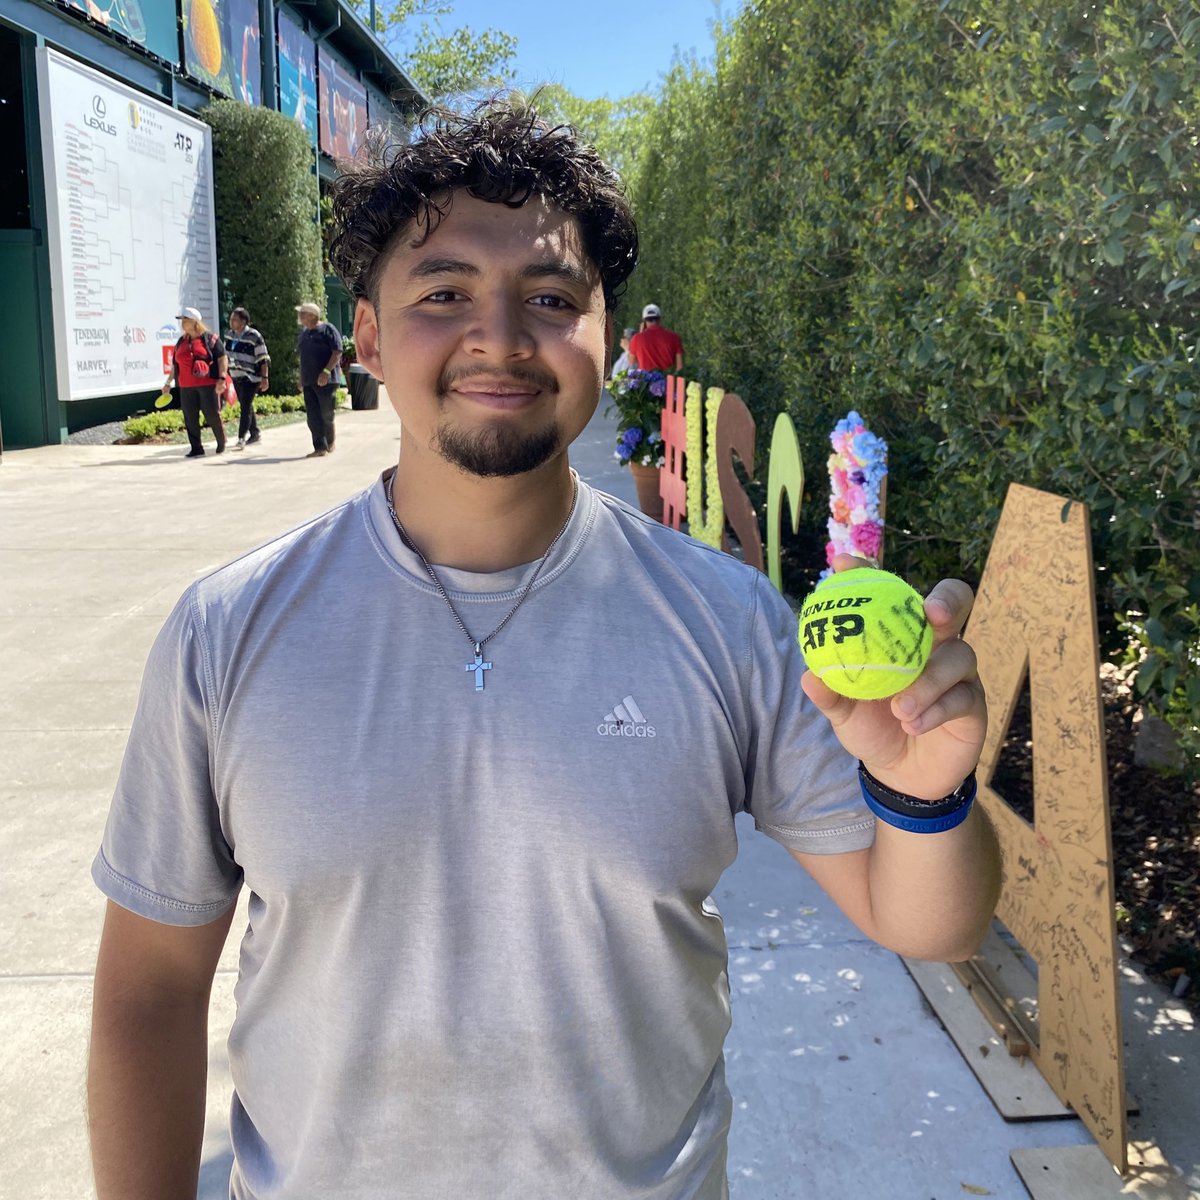 A two-part story of a Dunlop scavenger hunt 👀 #USClay | @dunloptennis